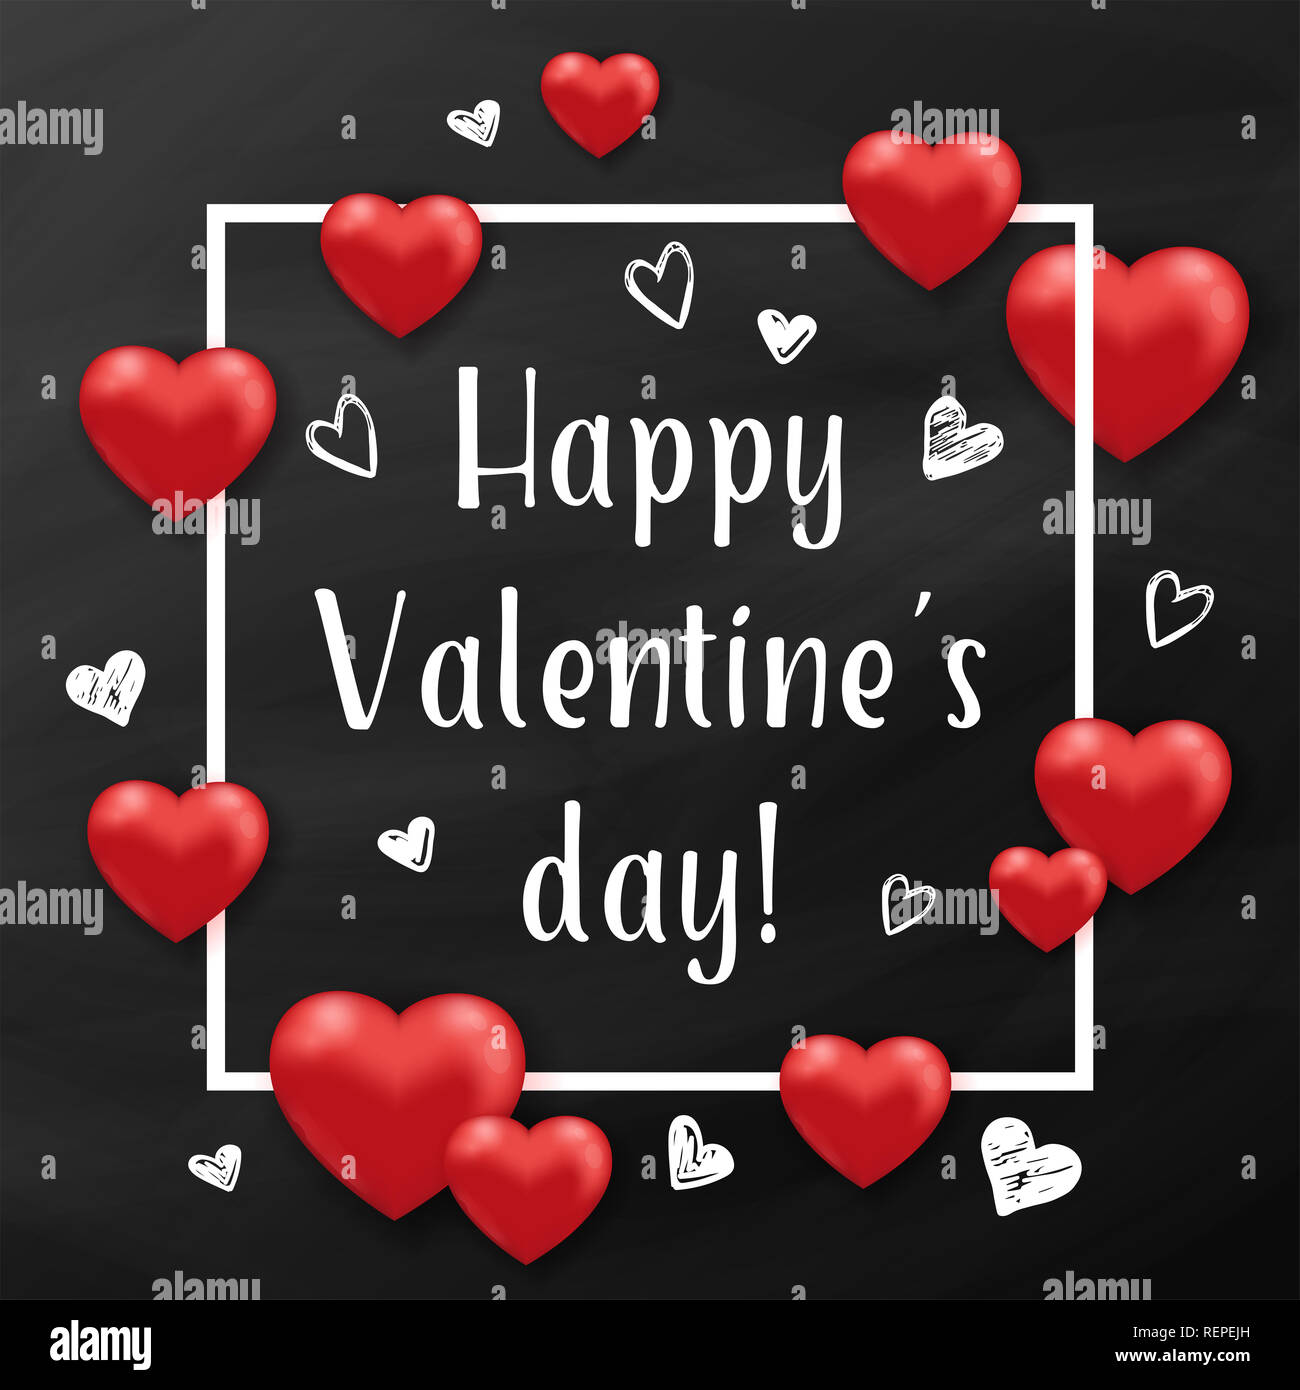 Holiday background with red hearts and white frame on a black chalkboard. Greeting card for Saint Valentine's day. Stock Photo